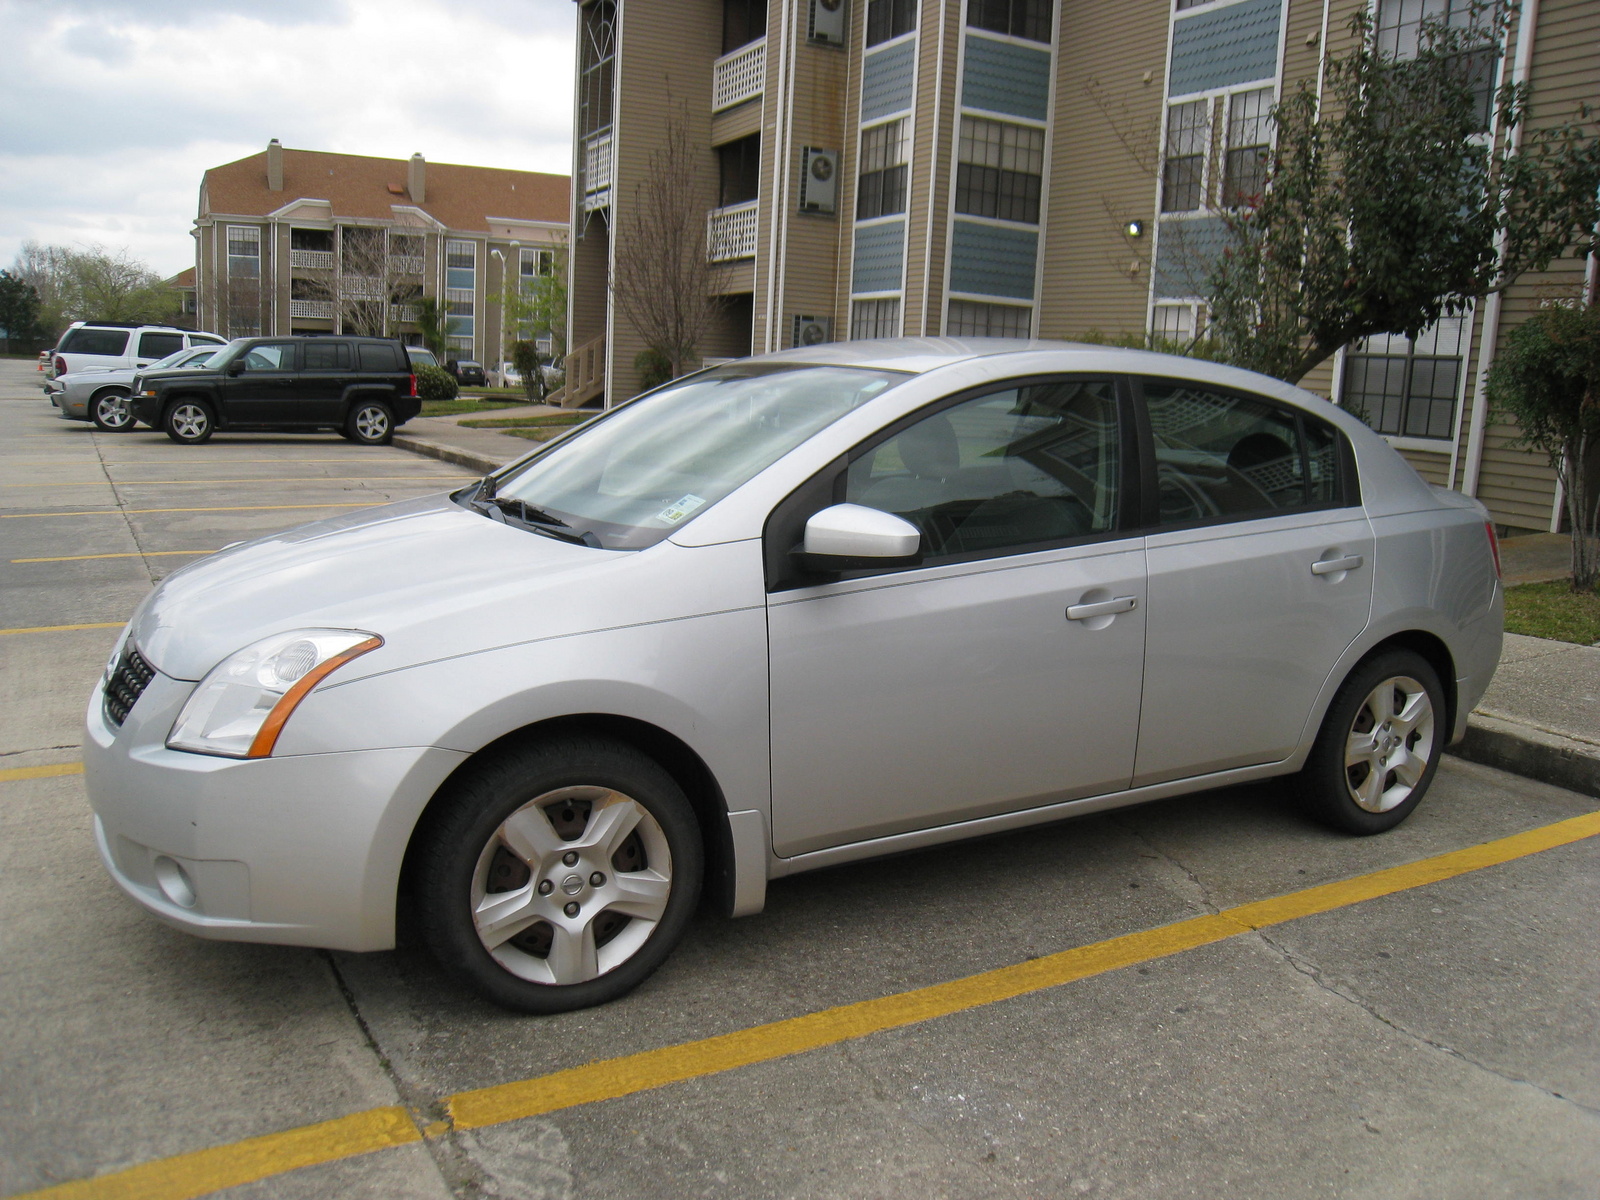 Ratings for 2008 nissan sentra